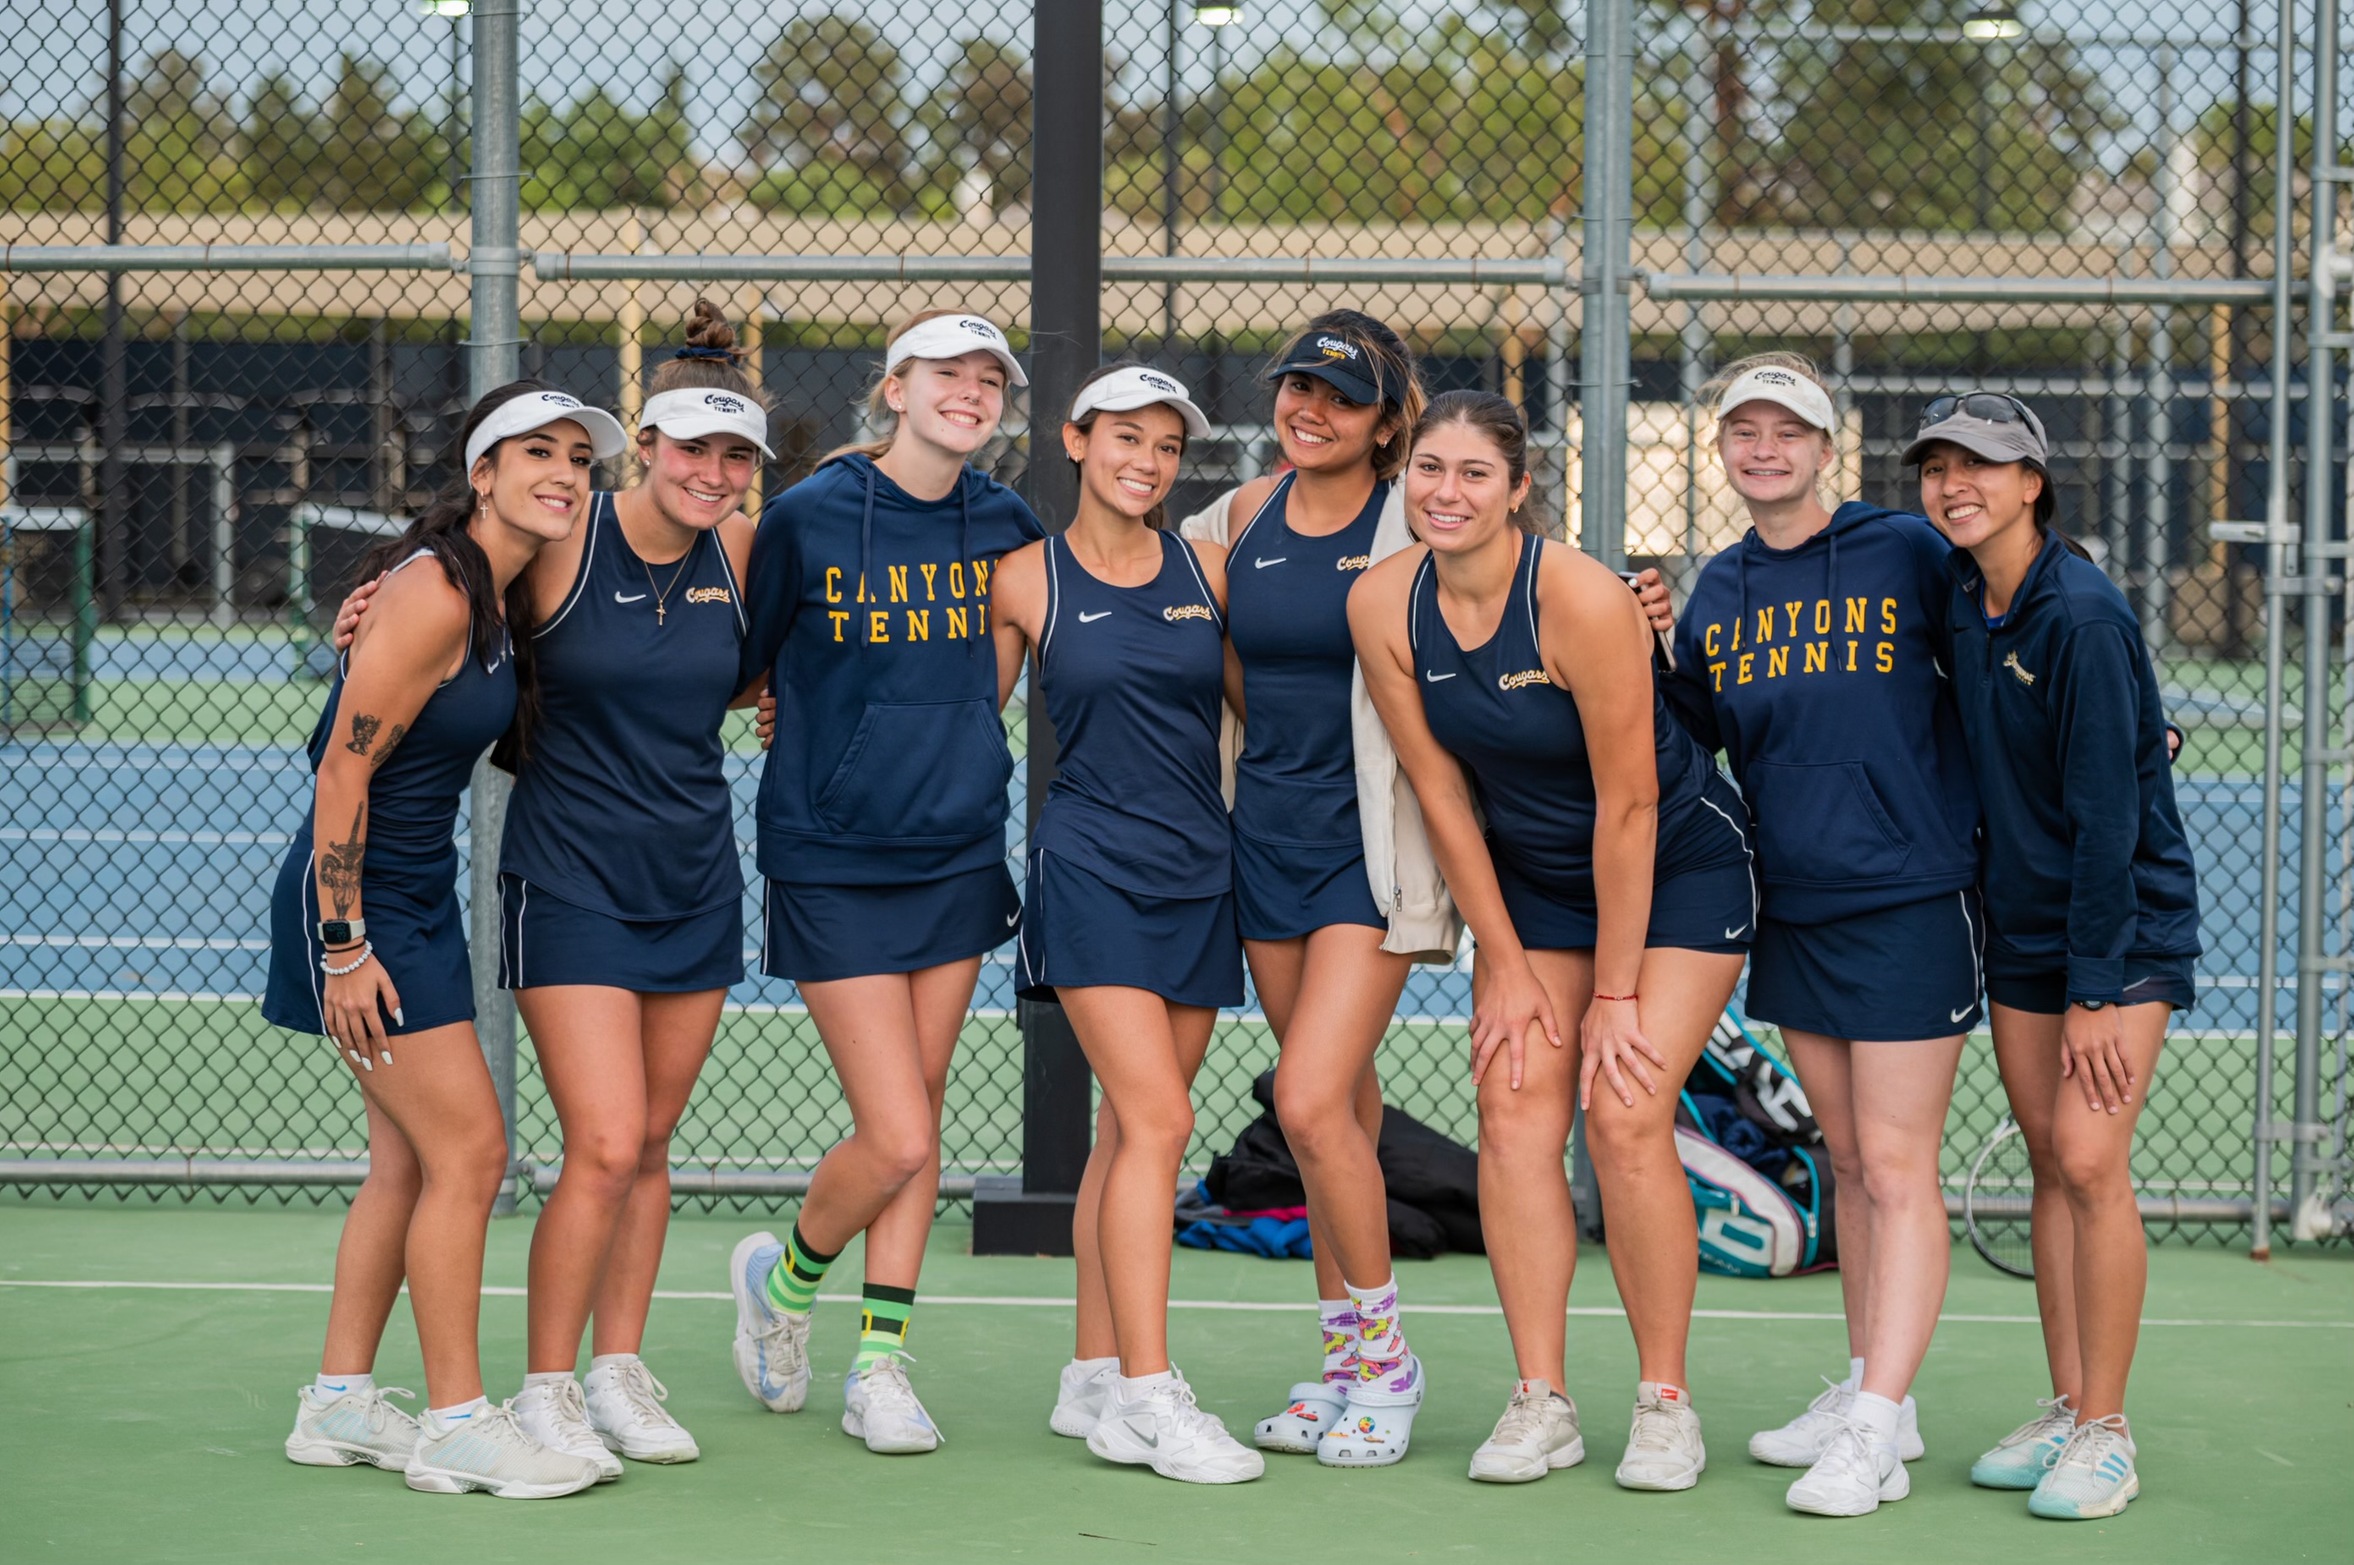 College of the Canyons women's tennis team photo.